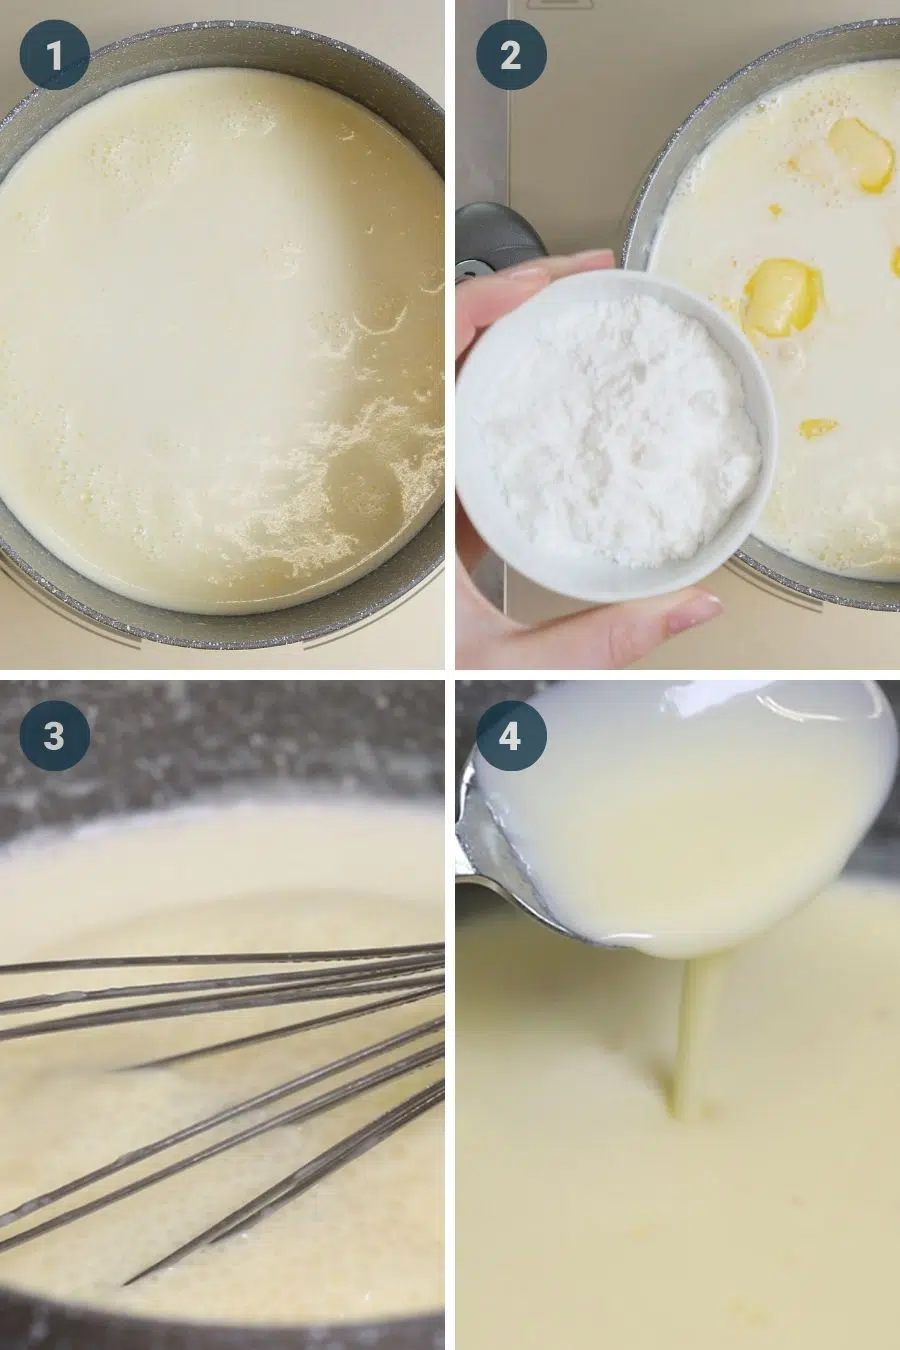 keto condensed milk step by step instructions